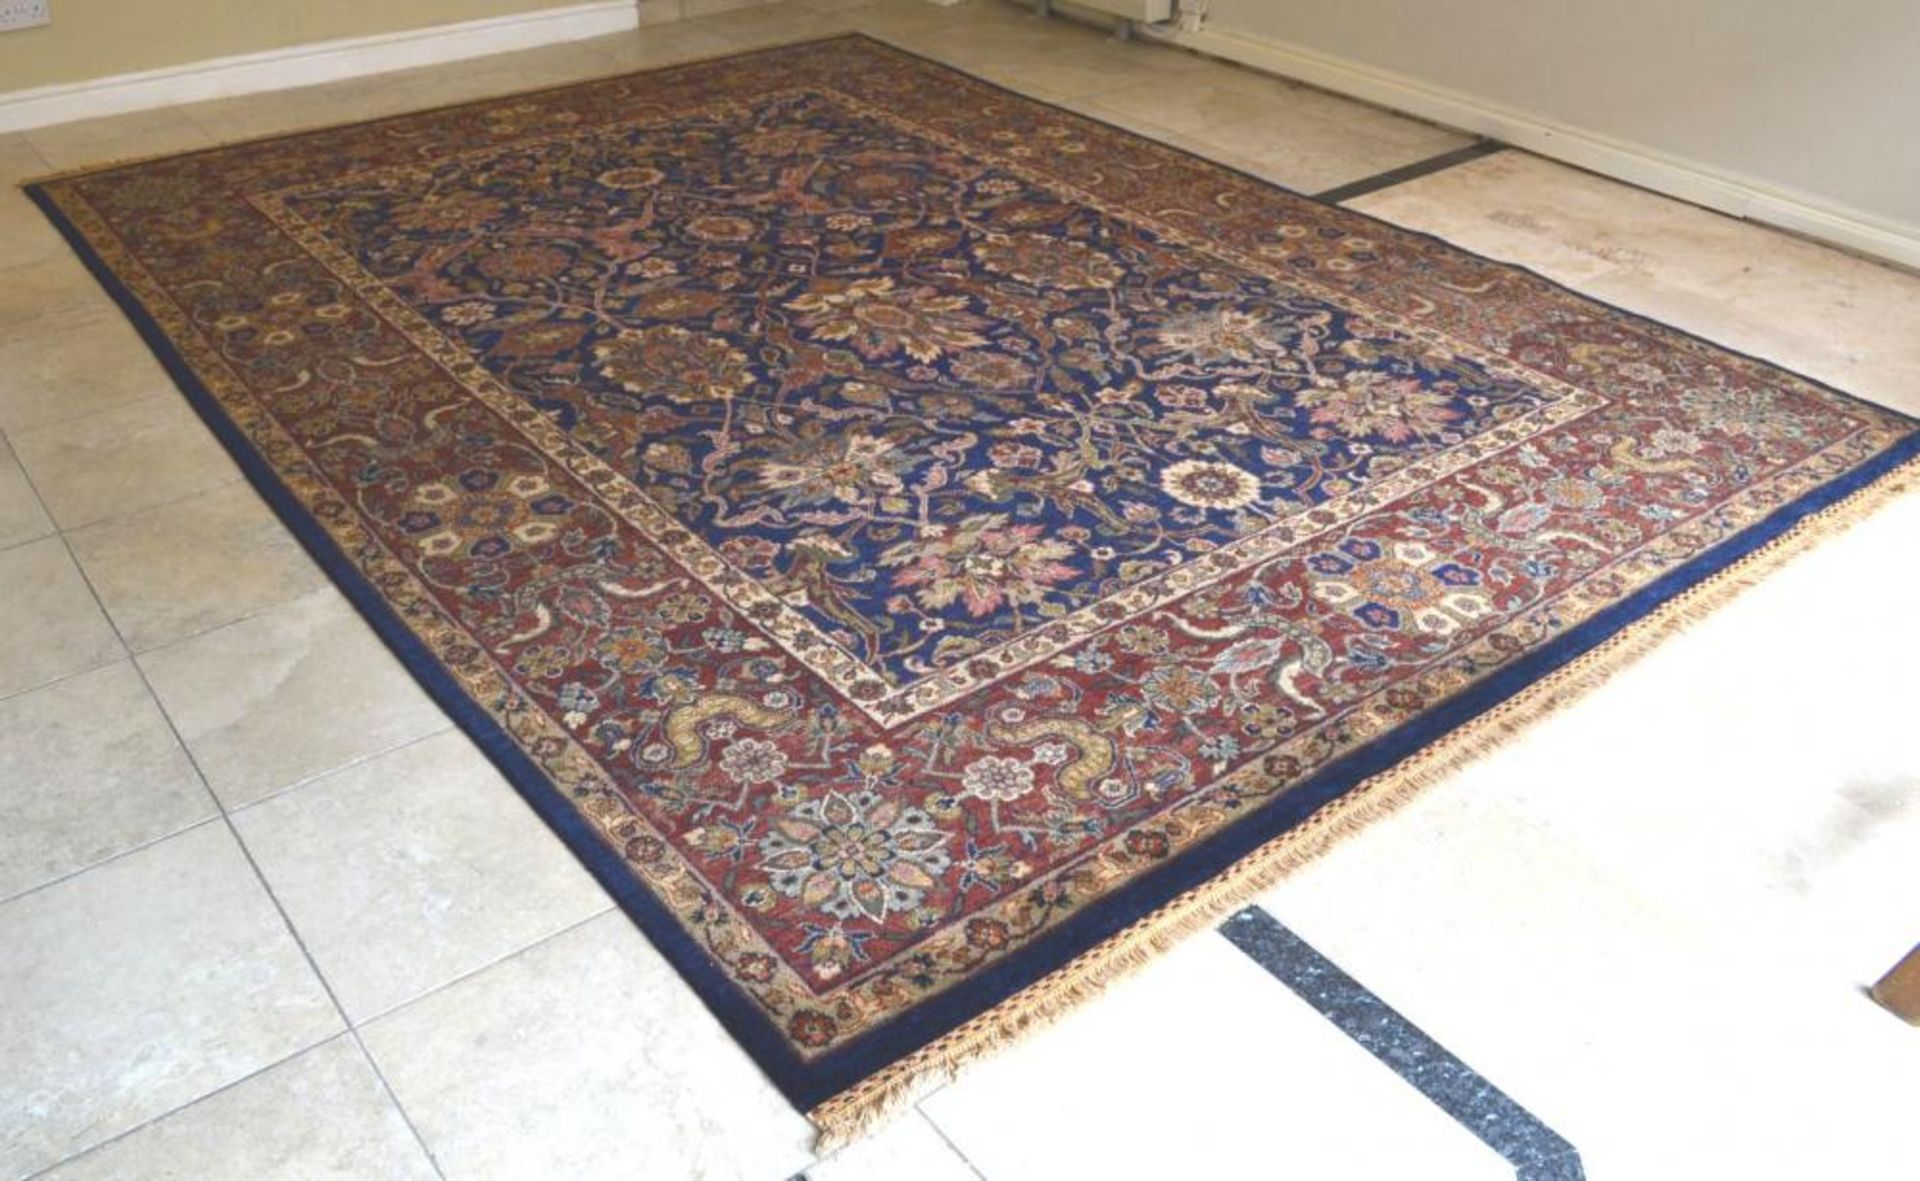 1 x Fine Indian Vegetable Dyed Handmade Carpet in Navy and Rust - All Wool With Cotton Foundation - - Image 16 of 22